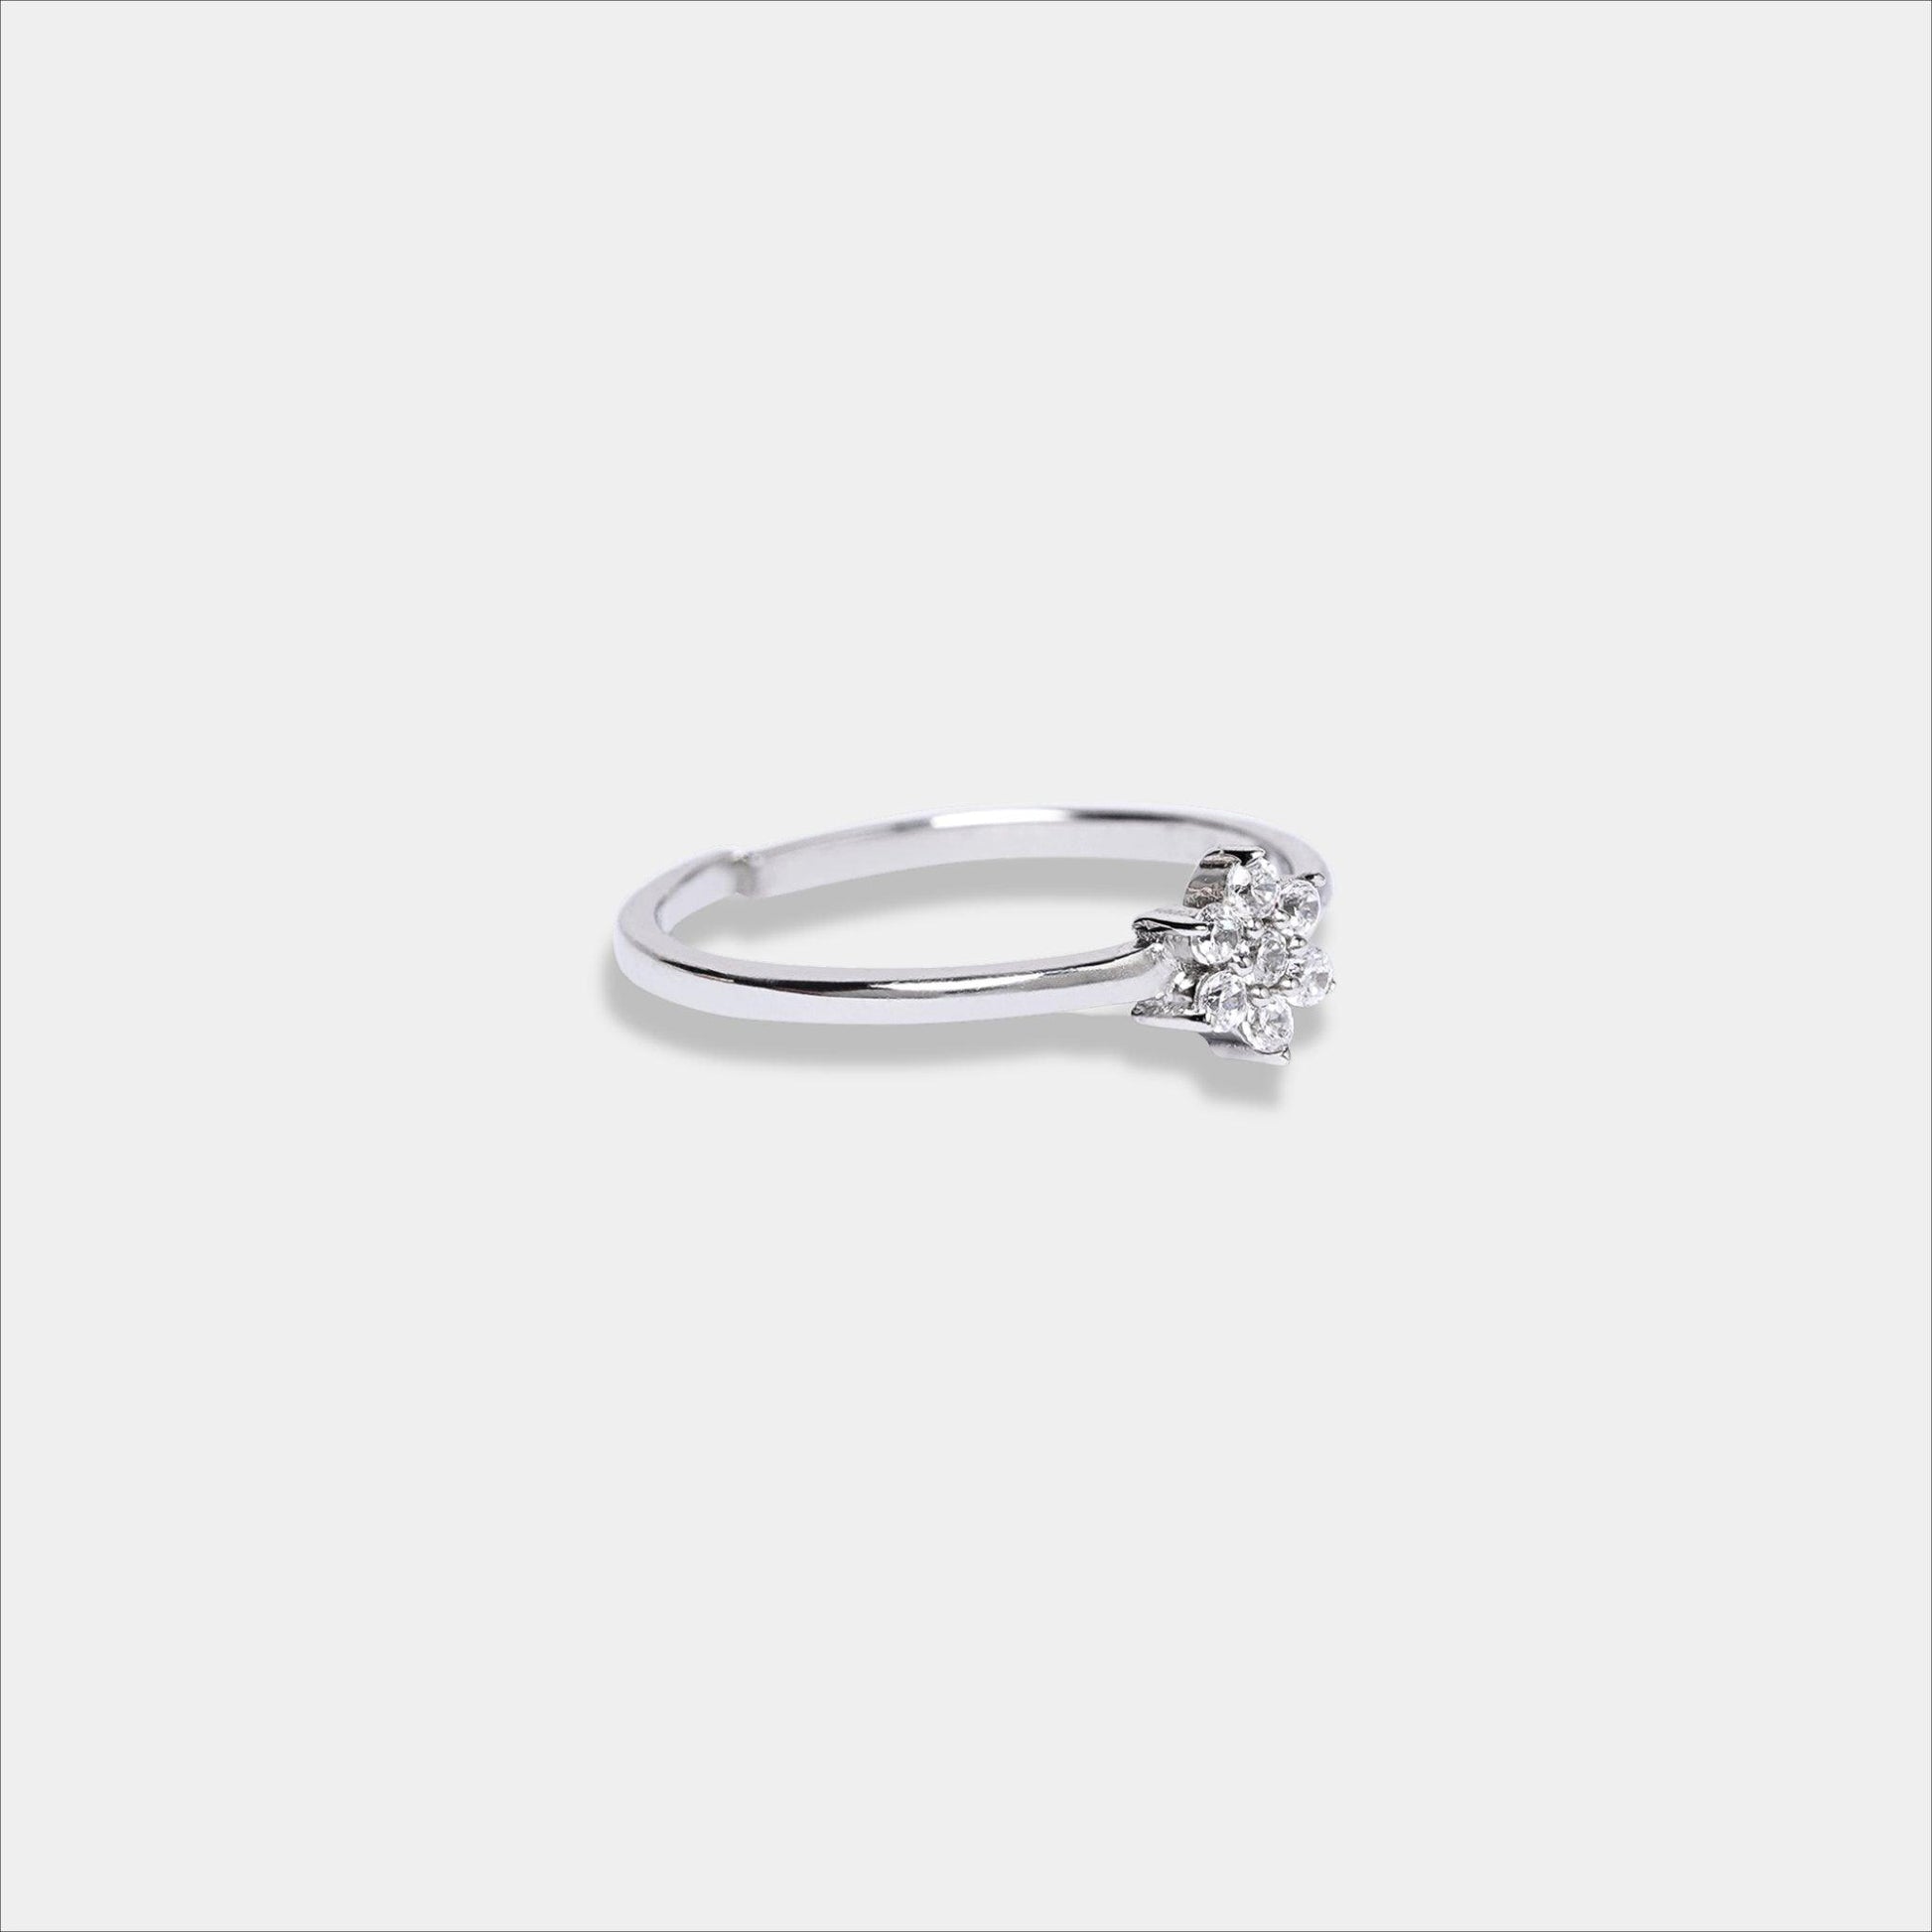 Elegant sterling silver ring featuring a diamond and star design